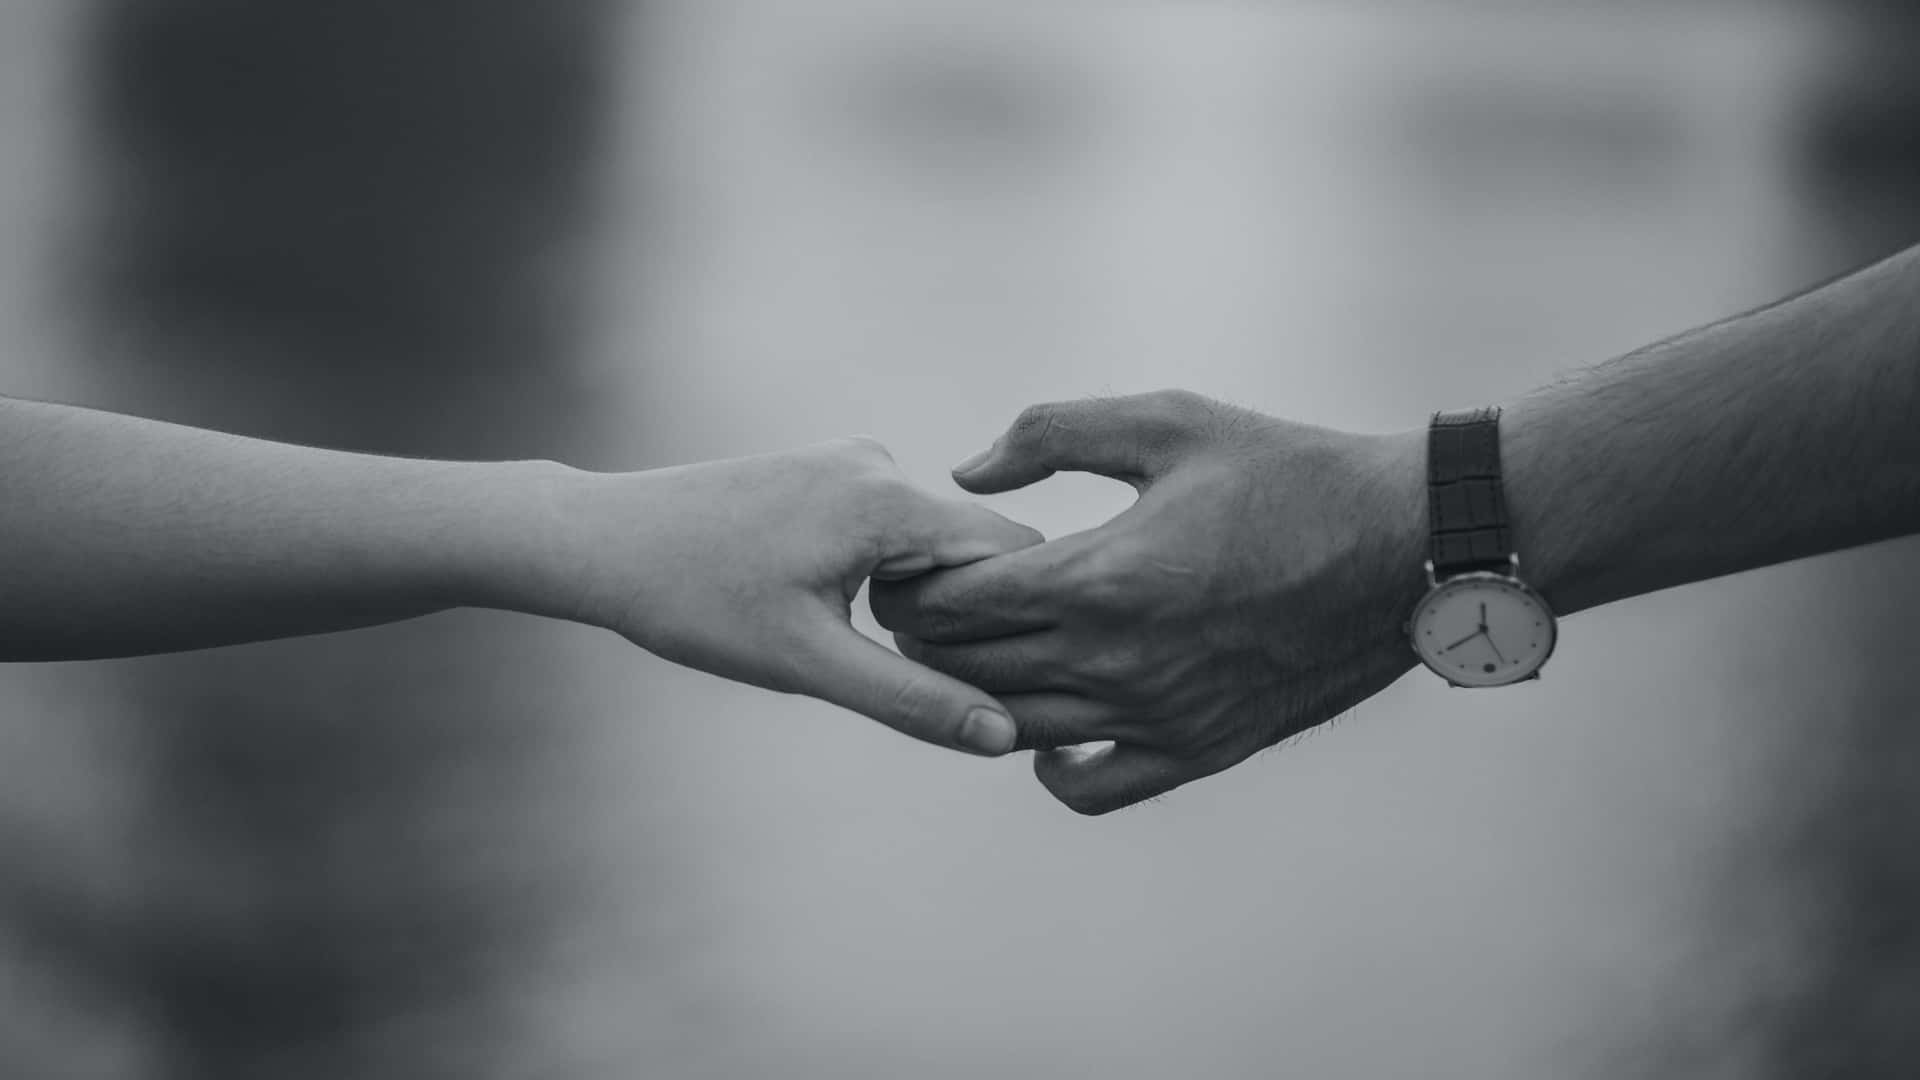 Intertwined Hands, A Symbol of Connection